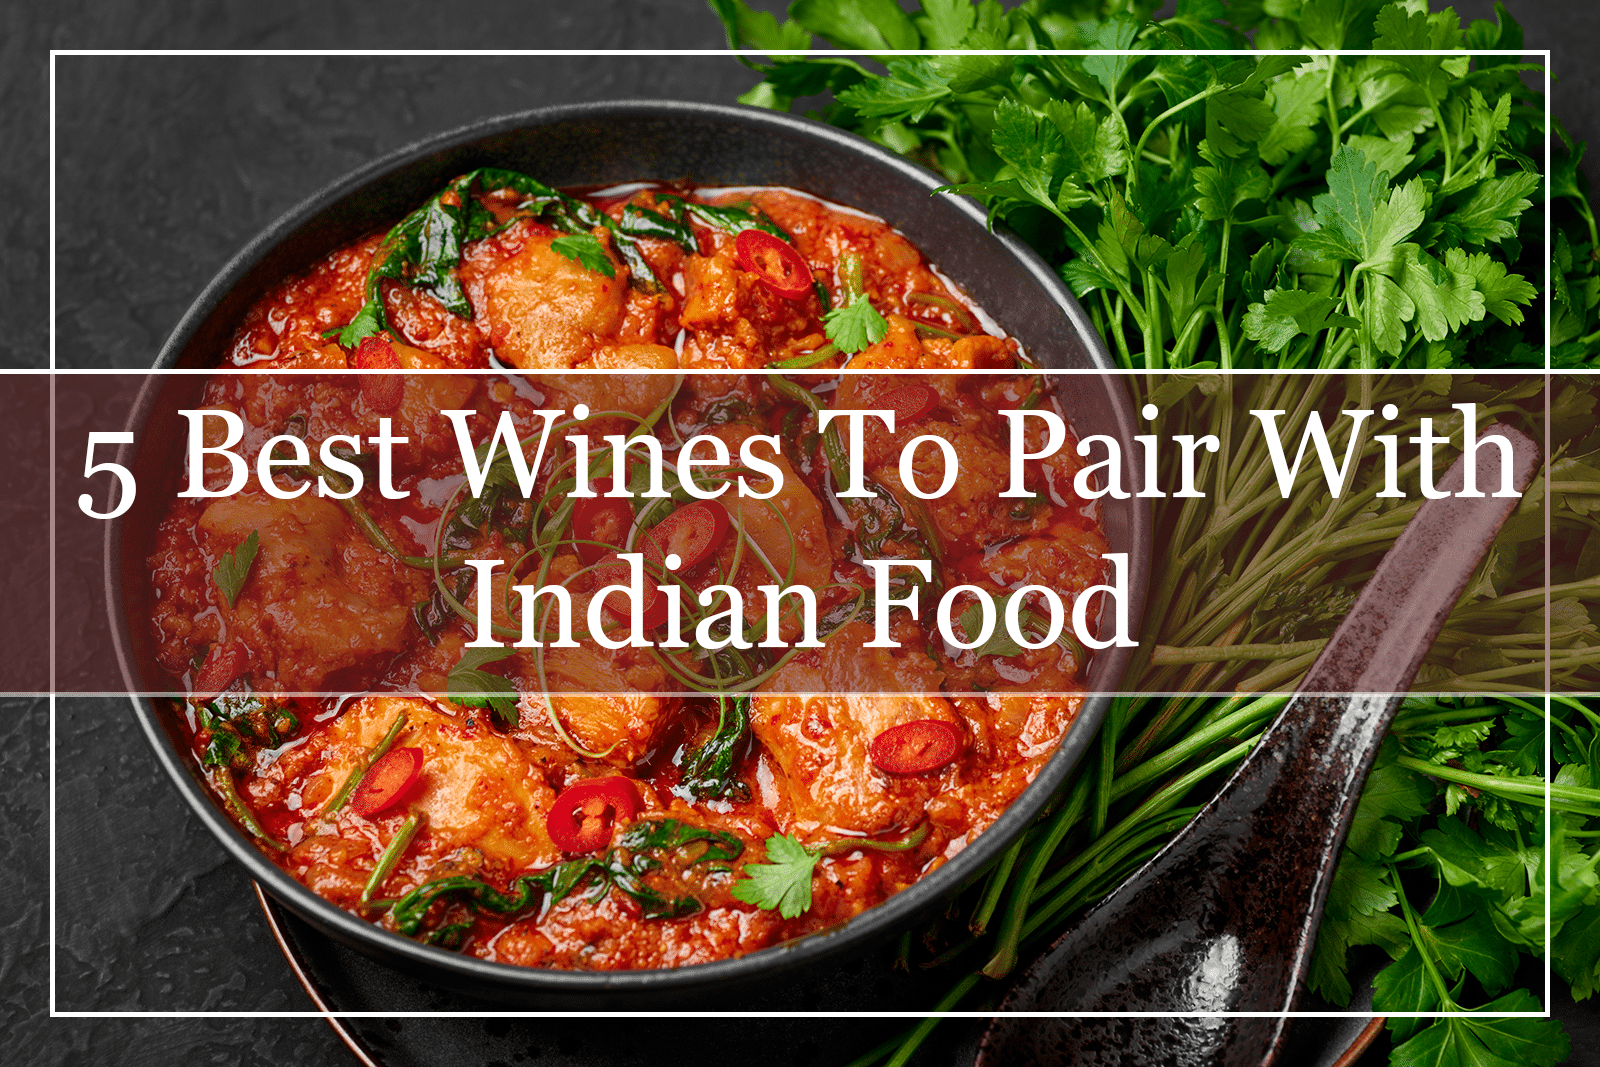 5 Best Wines to Pair With Indian Food (2021)